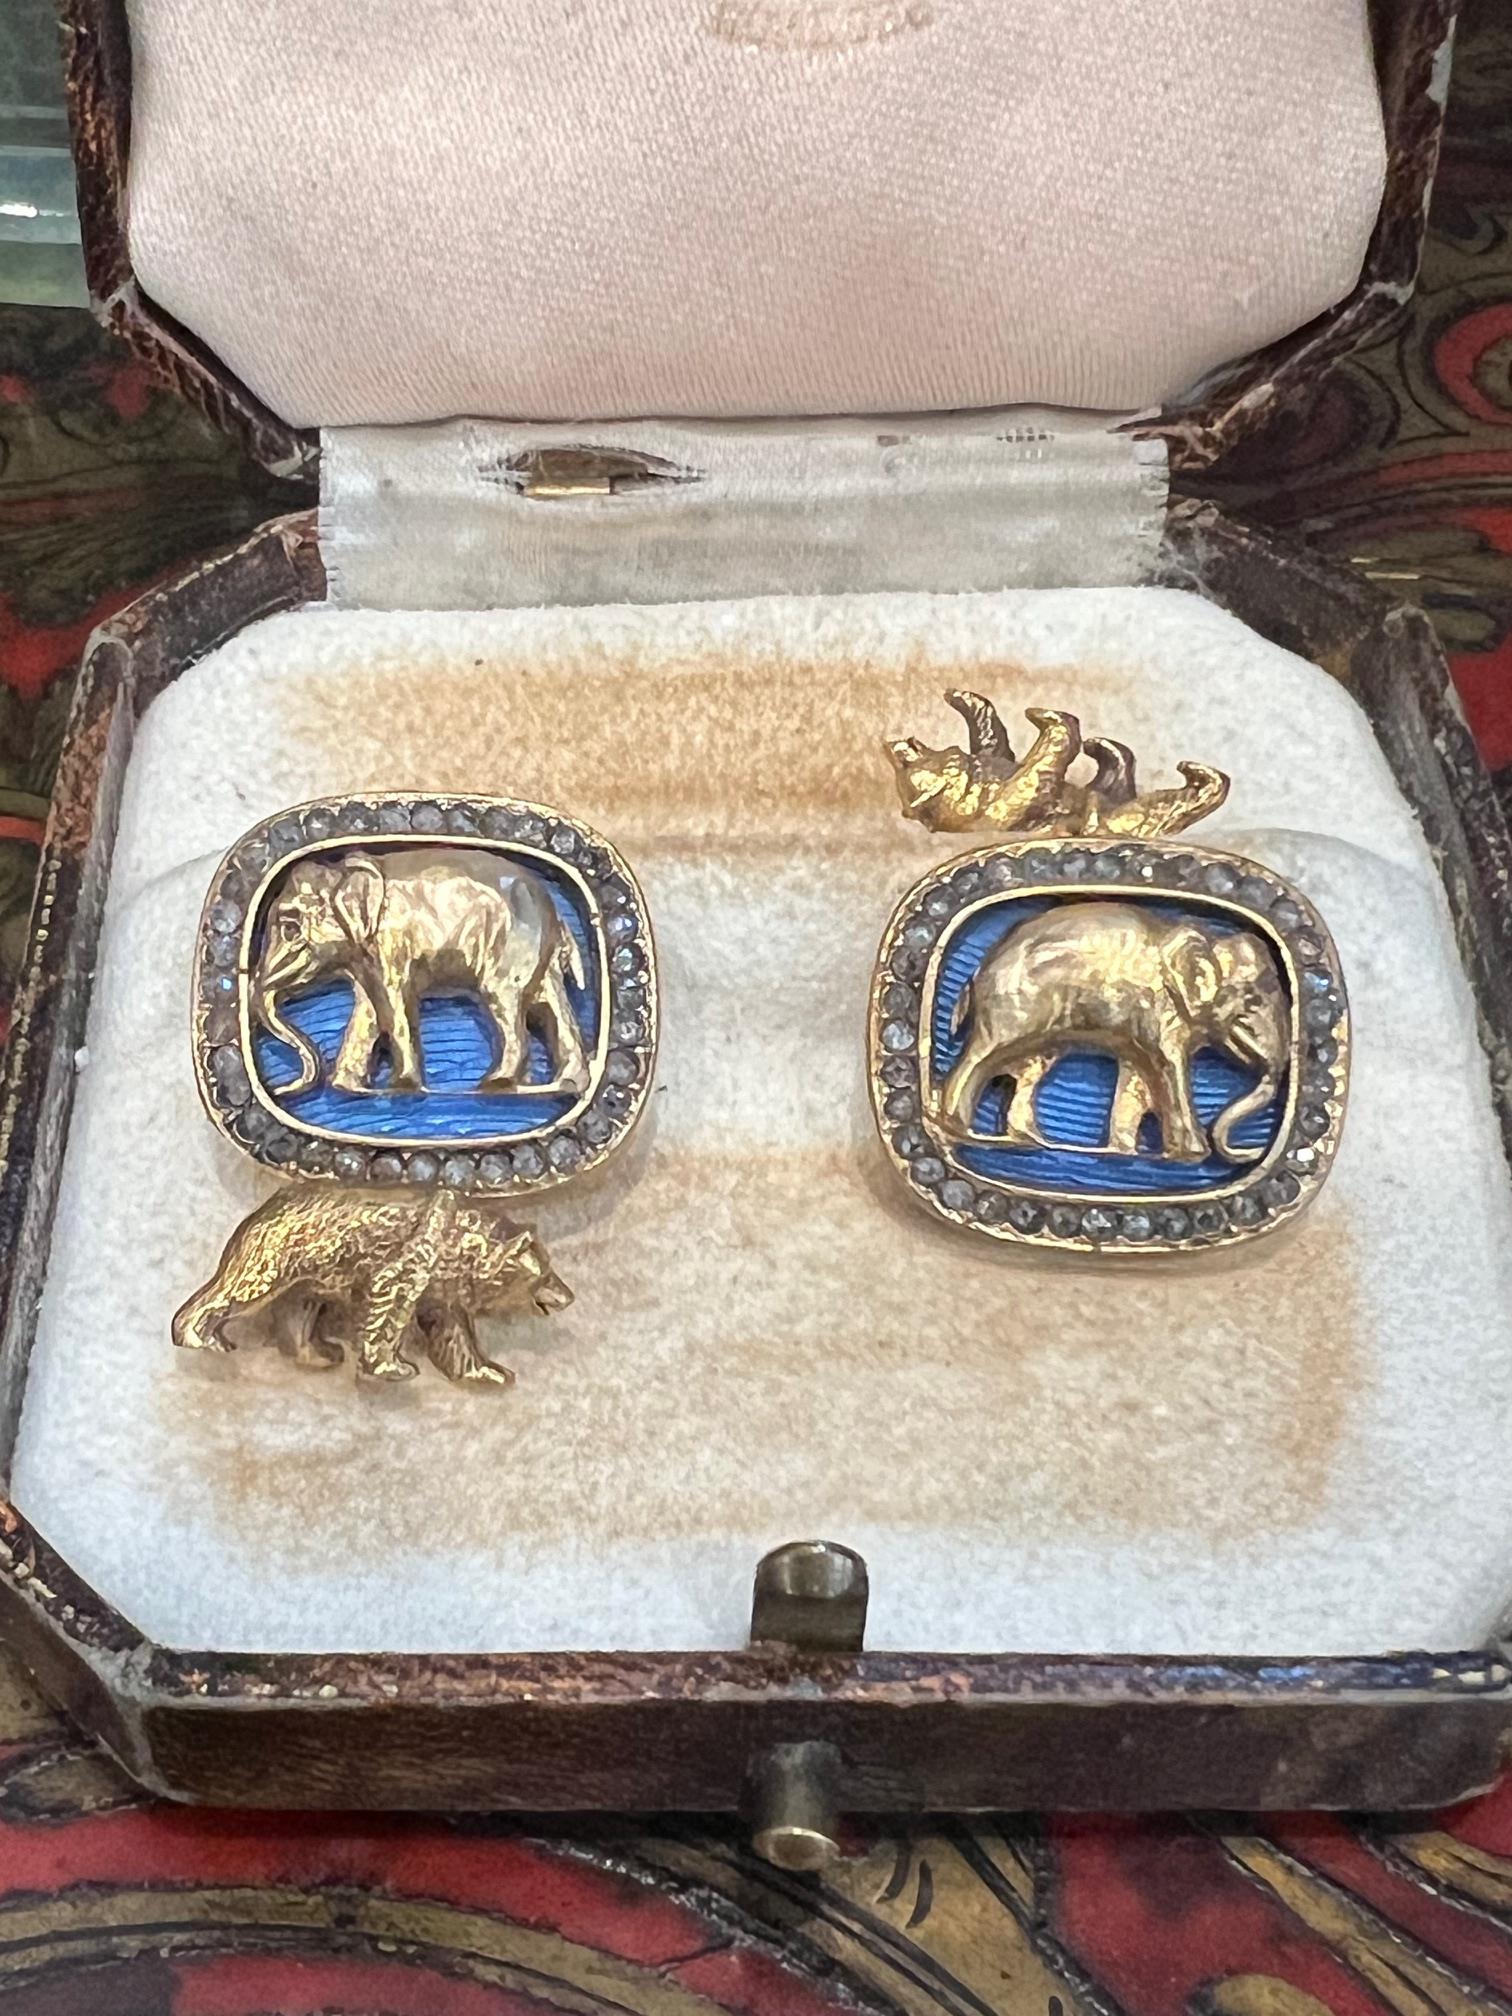 A PAIR OF FABERGE STYLE DIAMOND ENCRUSTED, SILVER GILT AND ENAMELLED CUFFLINKS - Image 4 of 13